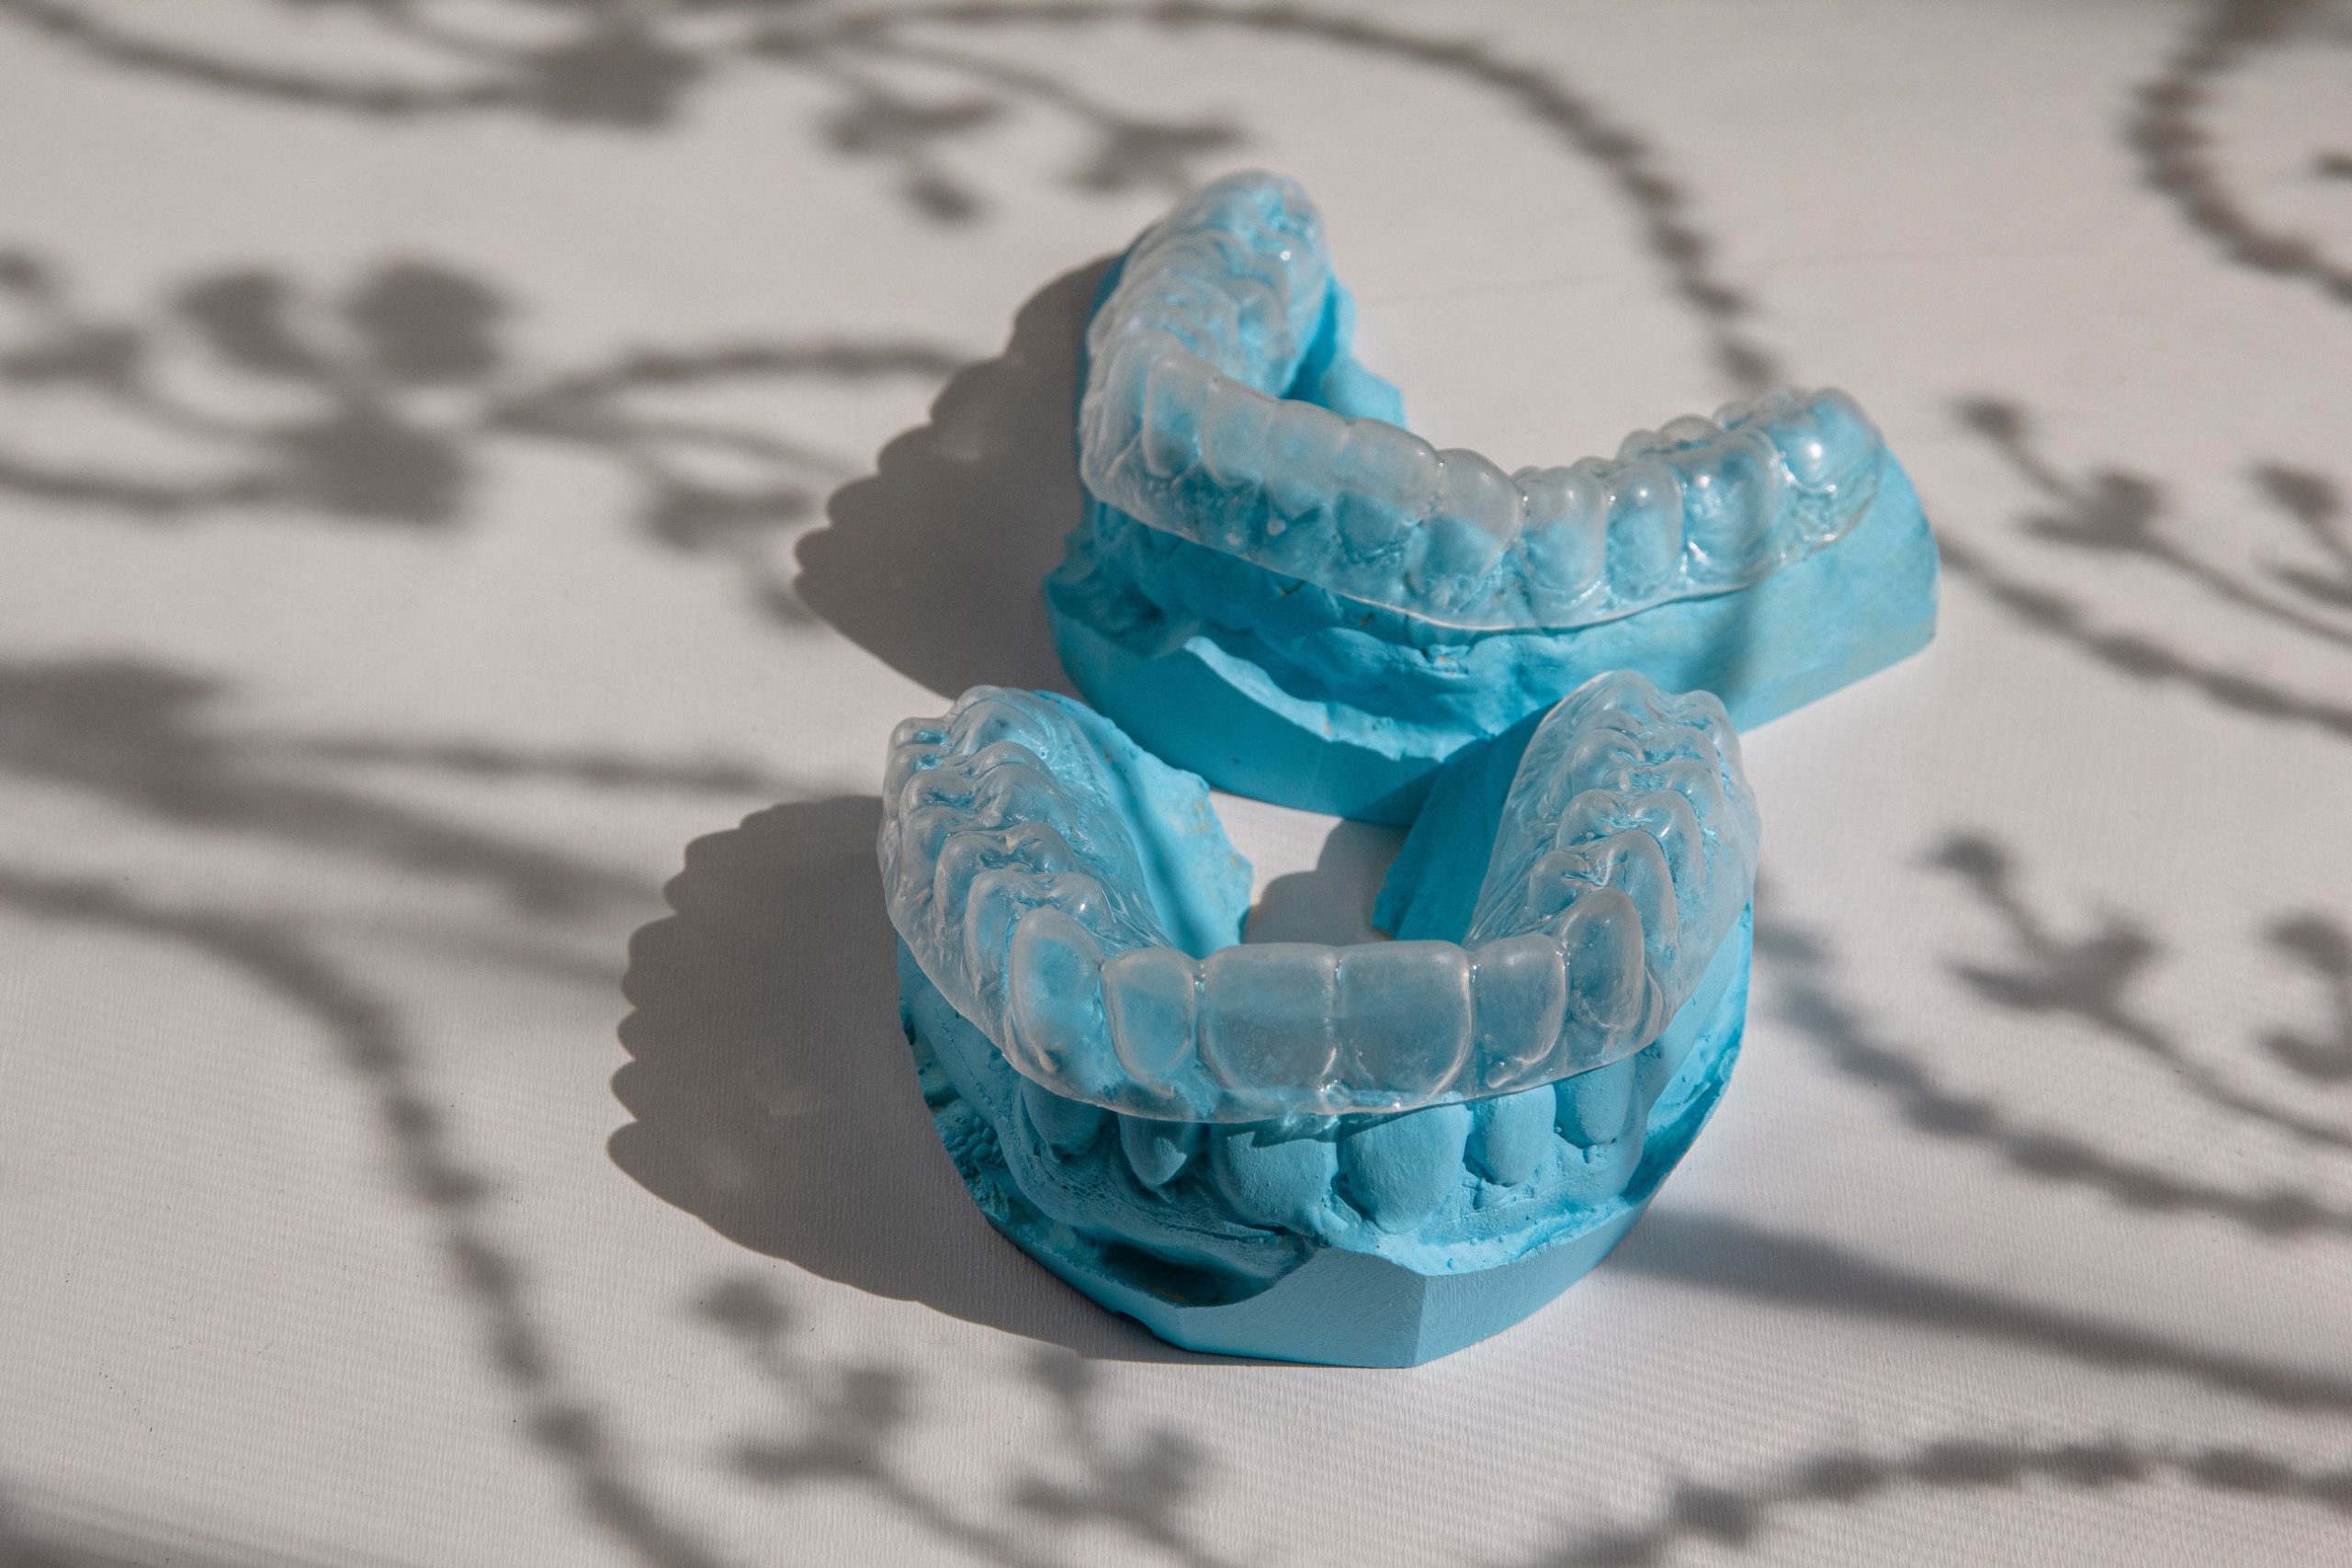 Invisalign Cleaning Tips